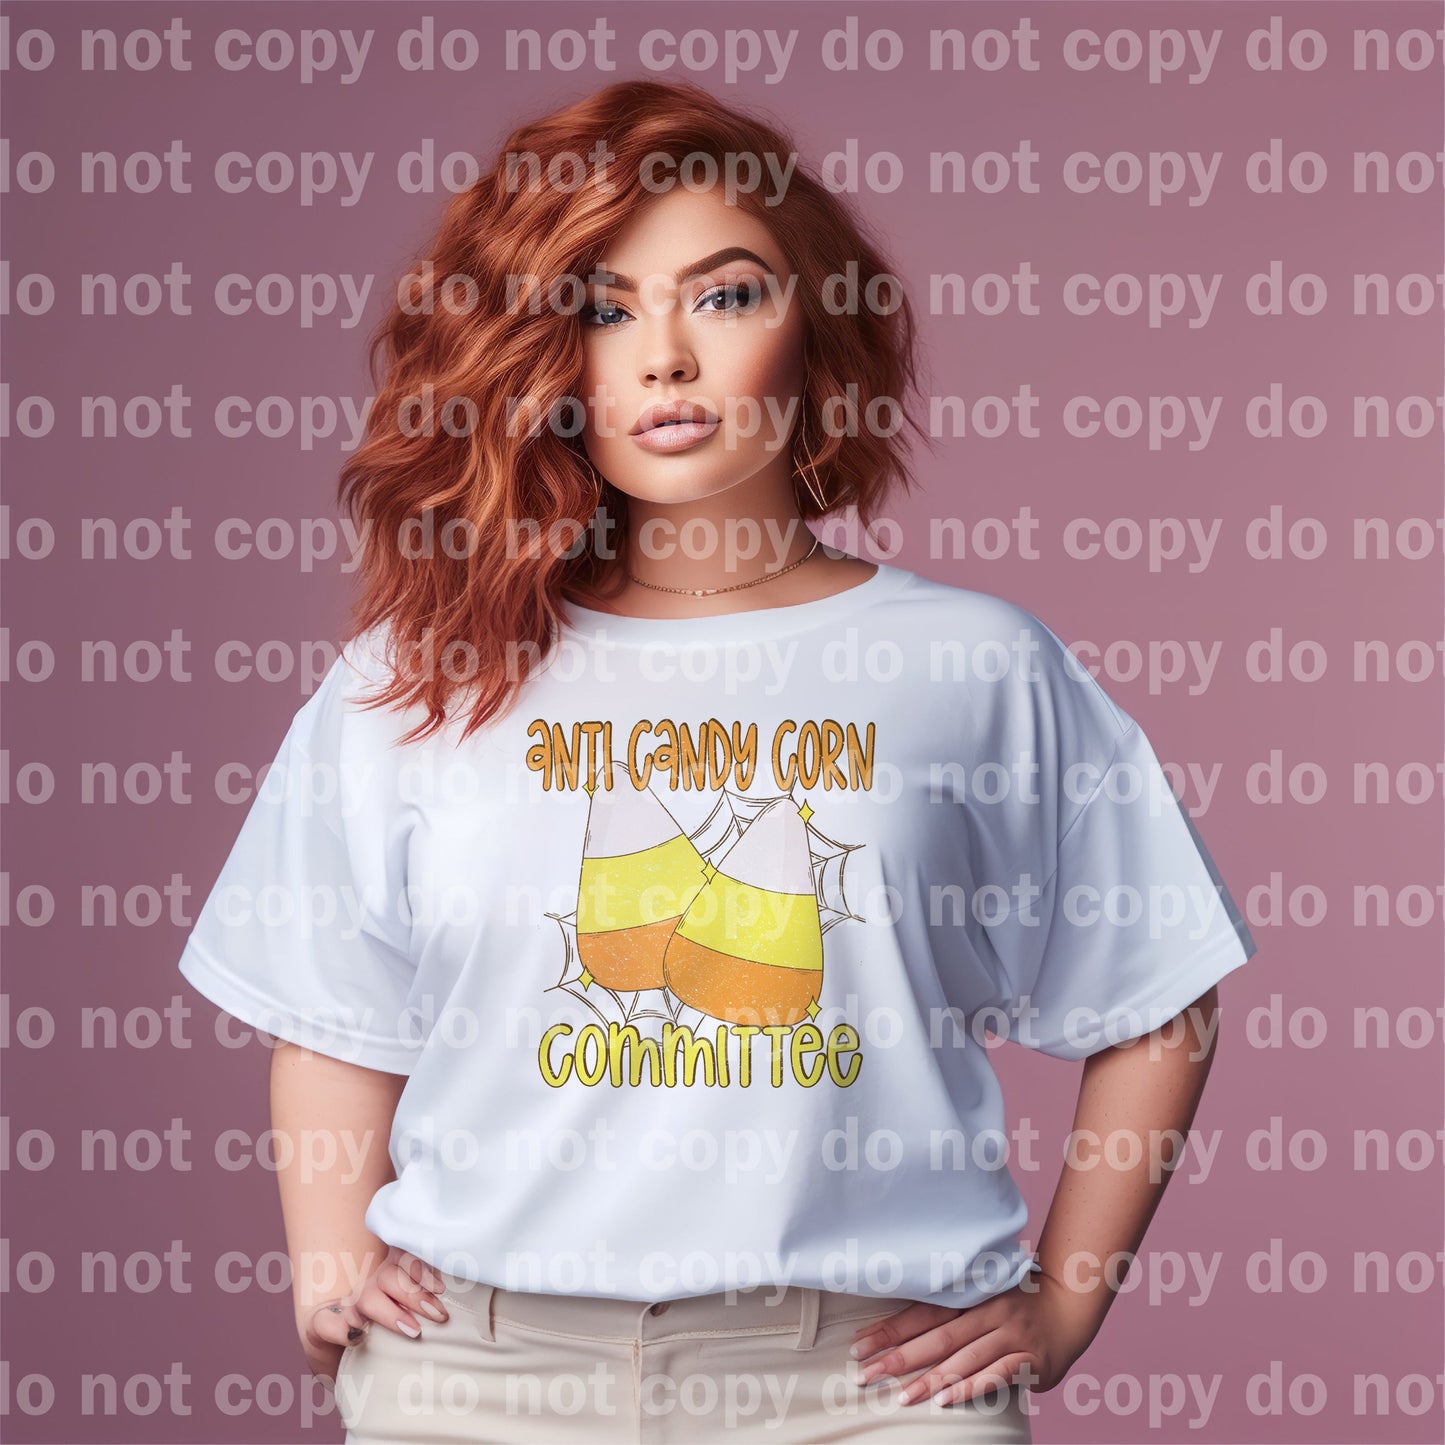 Anti Candy Corn Committee Dream Print or Sublimation Print